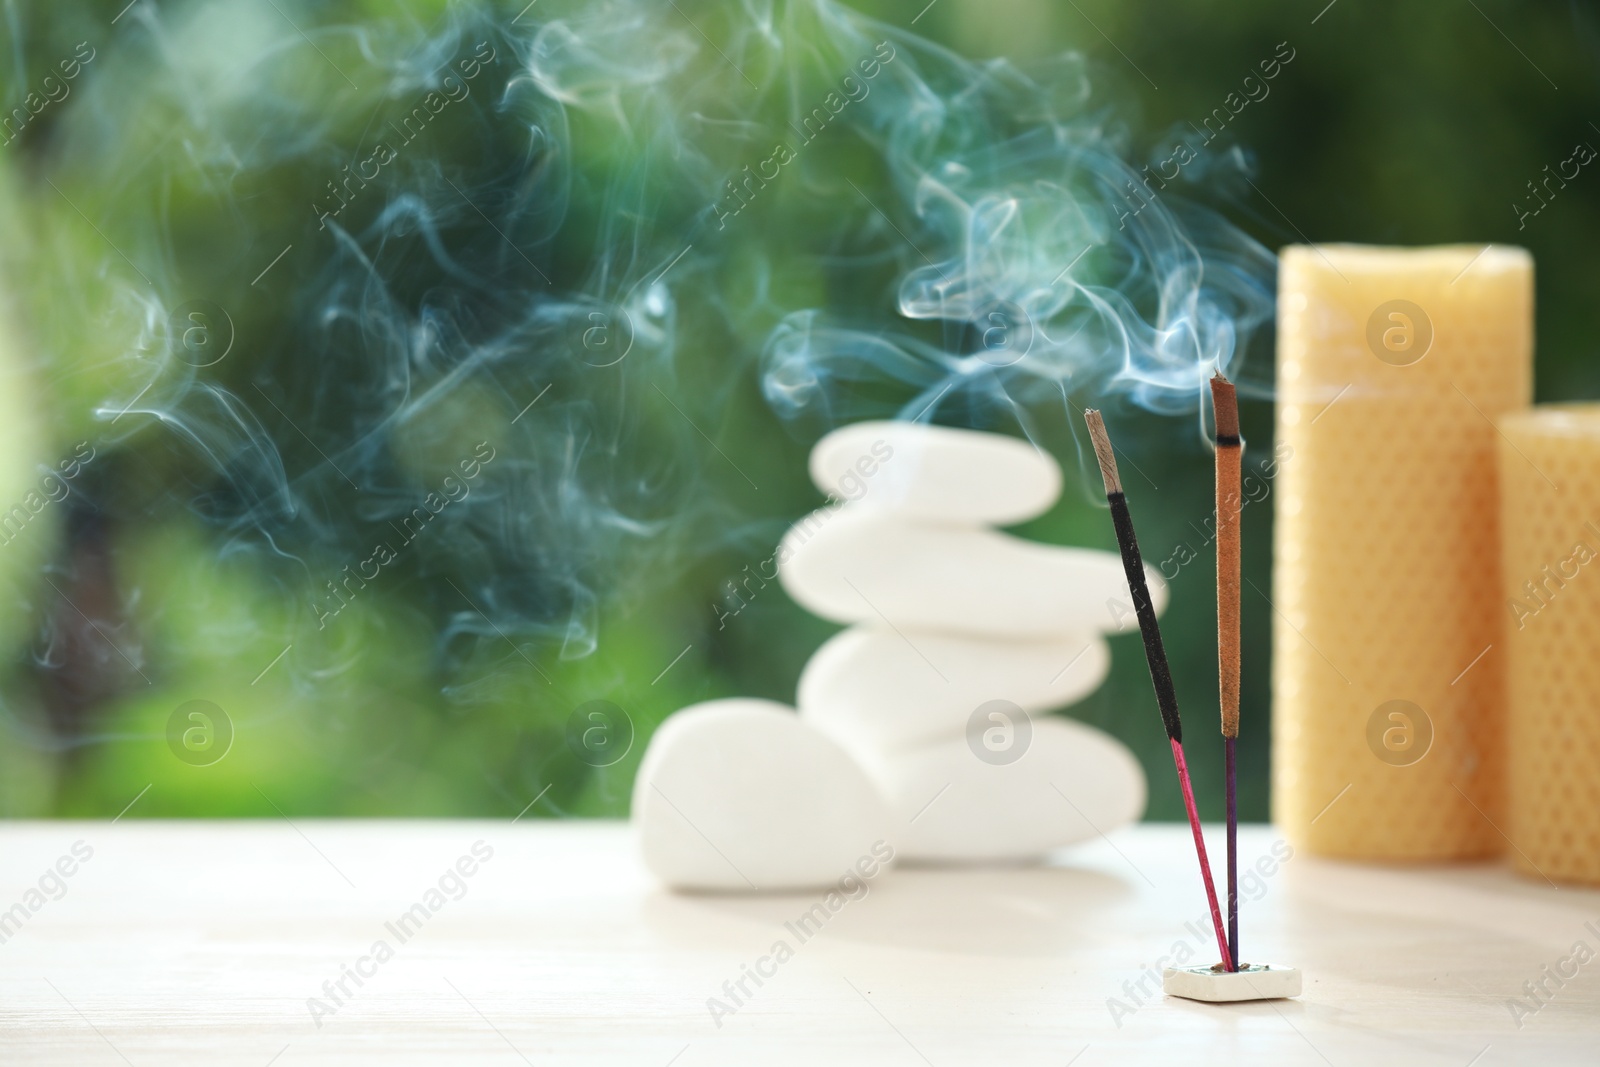 Photo of Incense sticks smoldering near stones and candles on wooden table outdoors, space for text